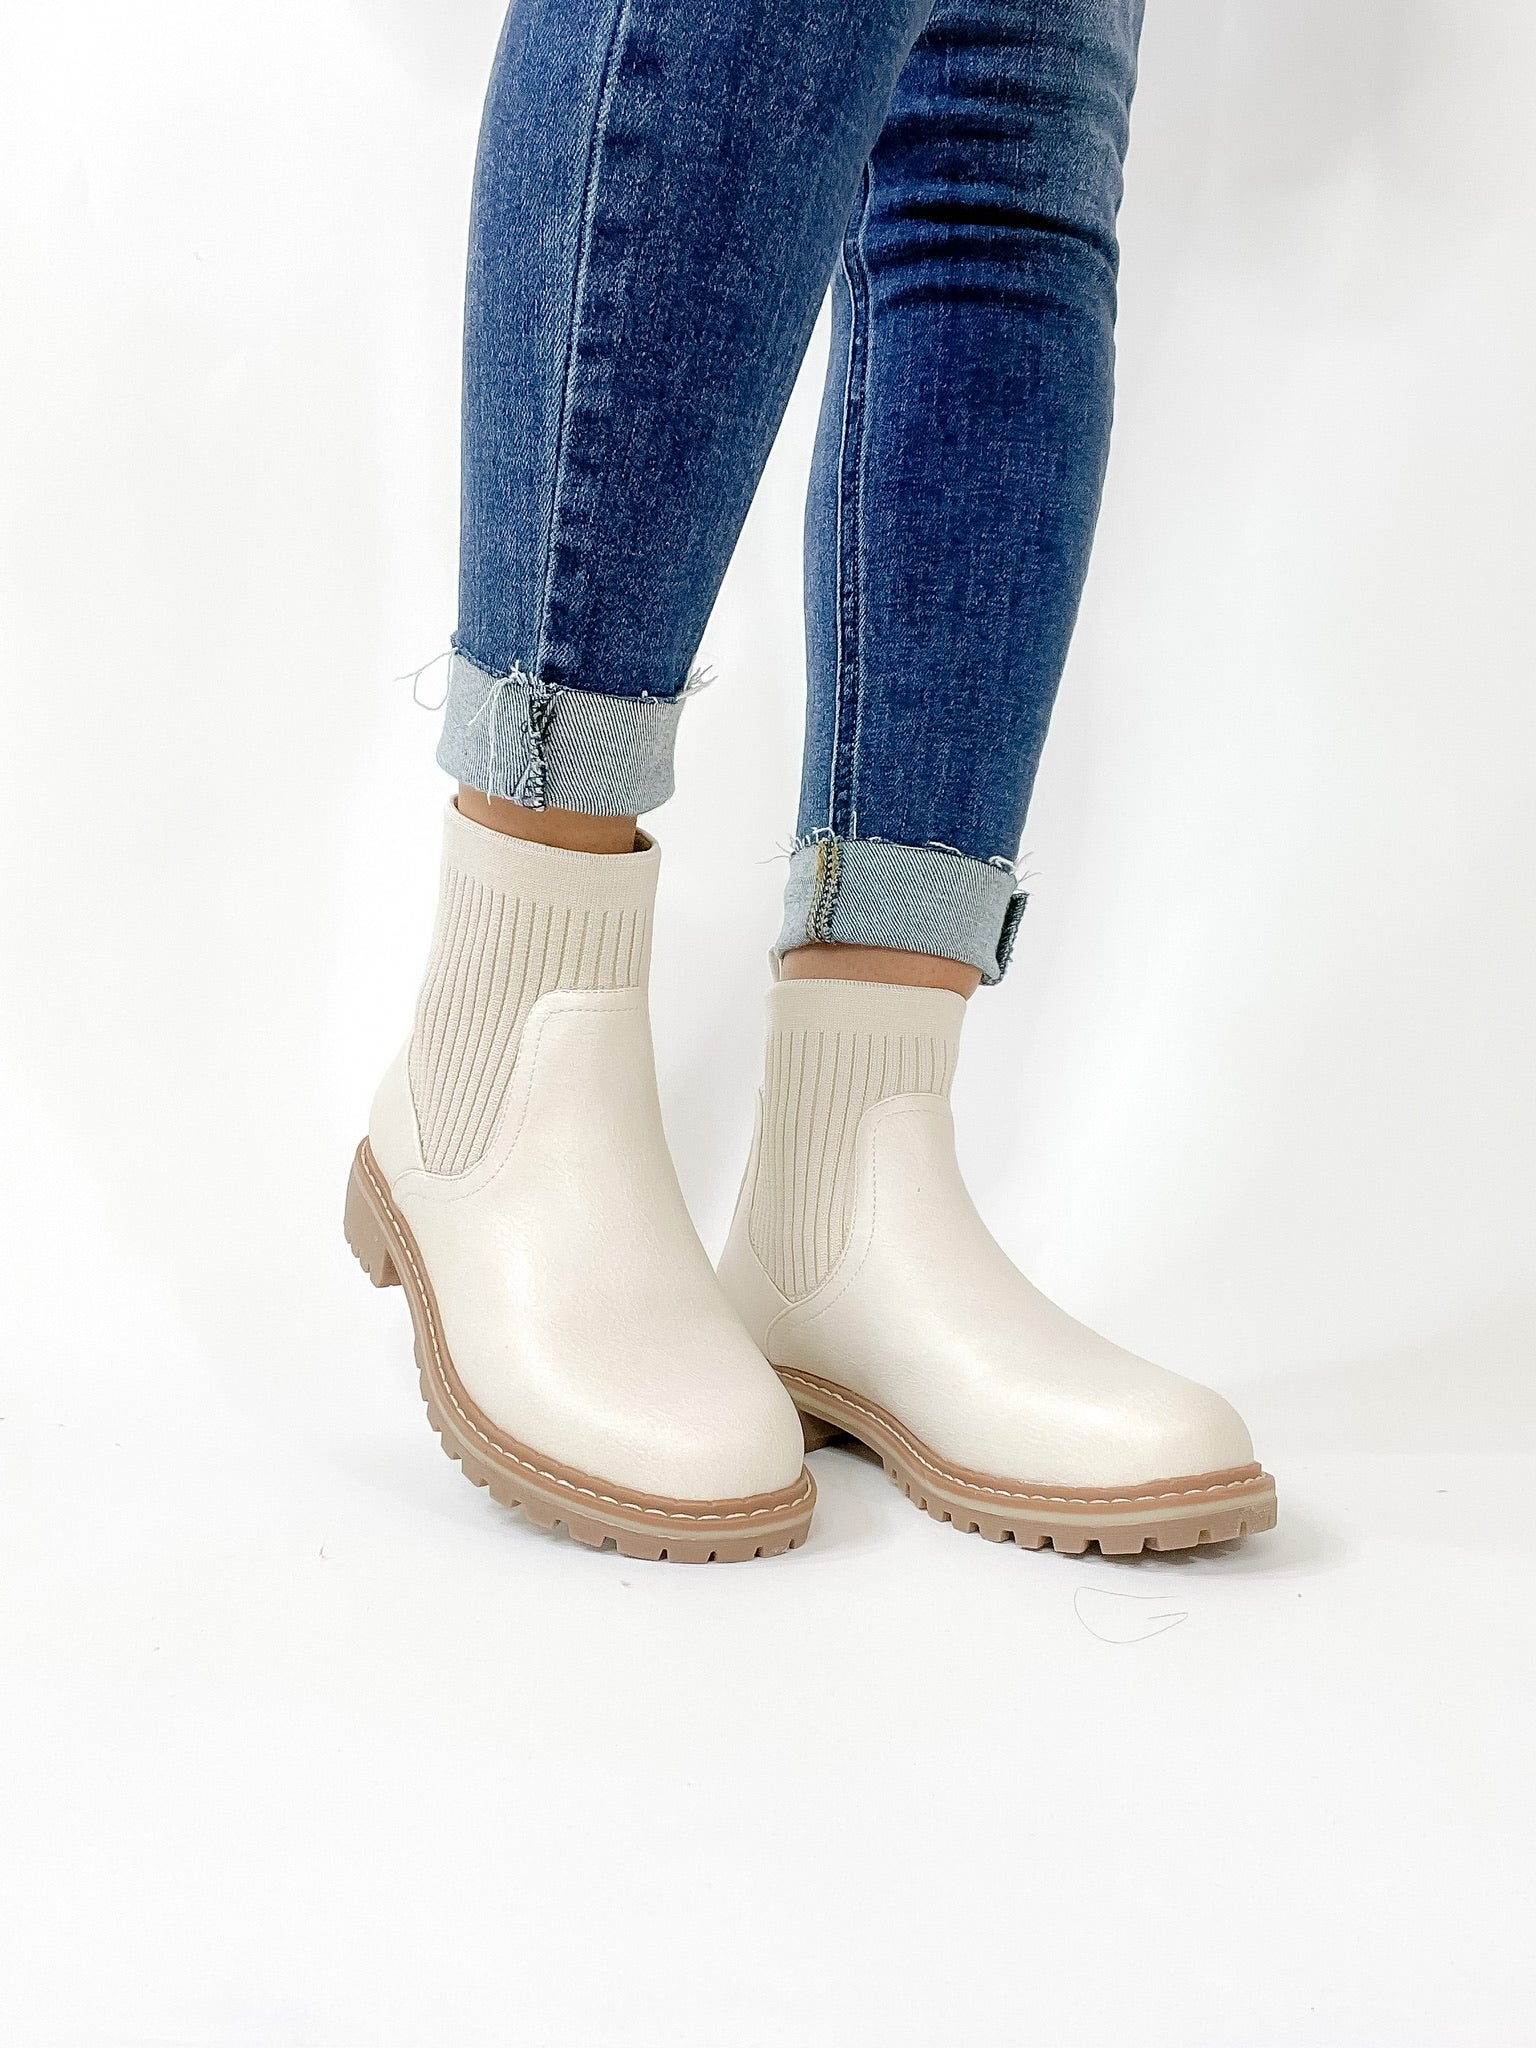 Corky's | Cabin Fever Slip On Booties in Cream